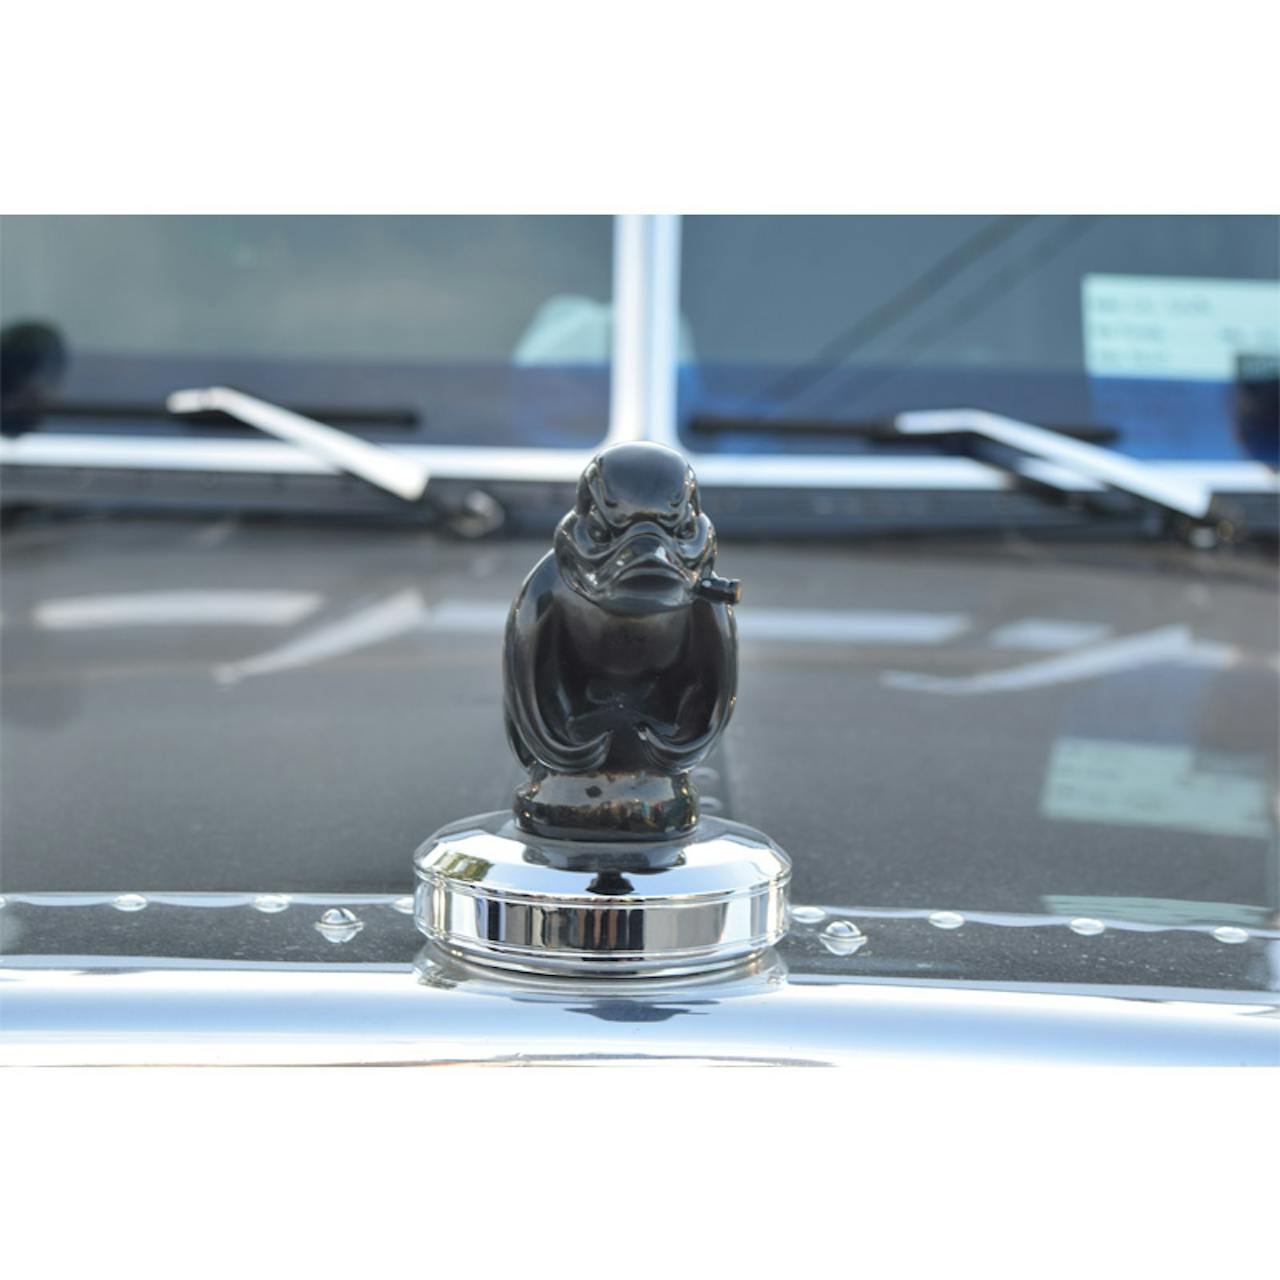 Angry Rubber Duck Hood Ornament Death Proof Gloss Black